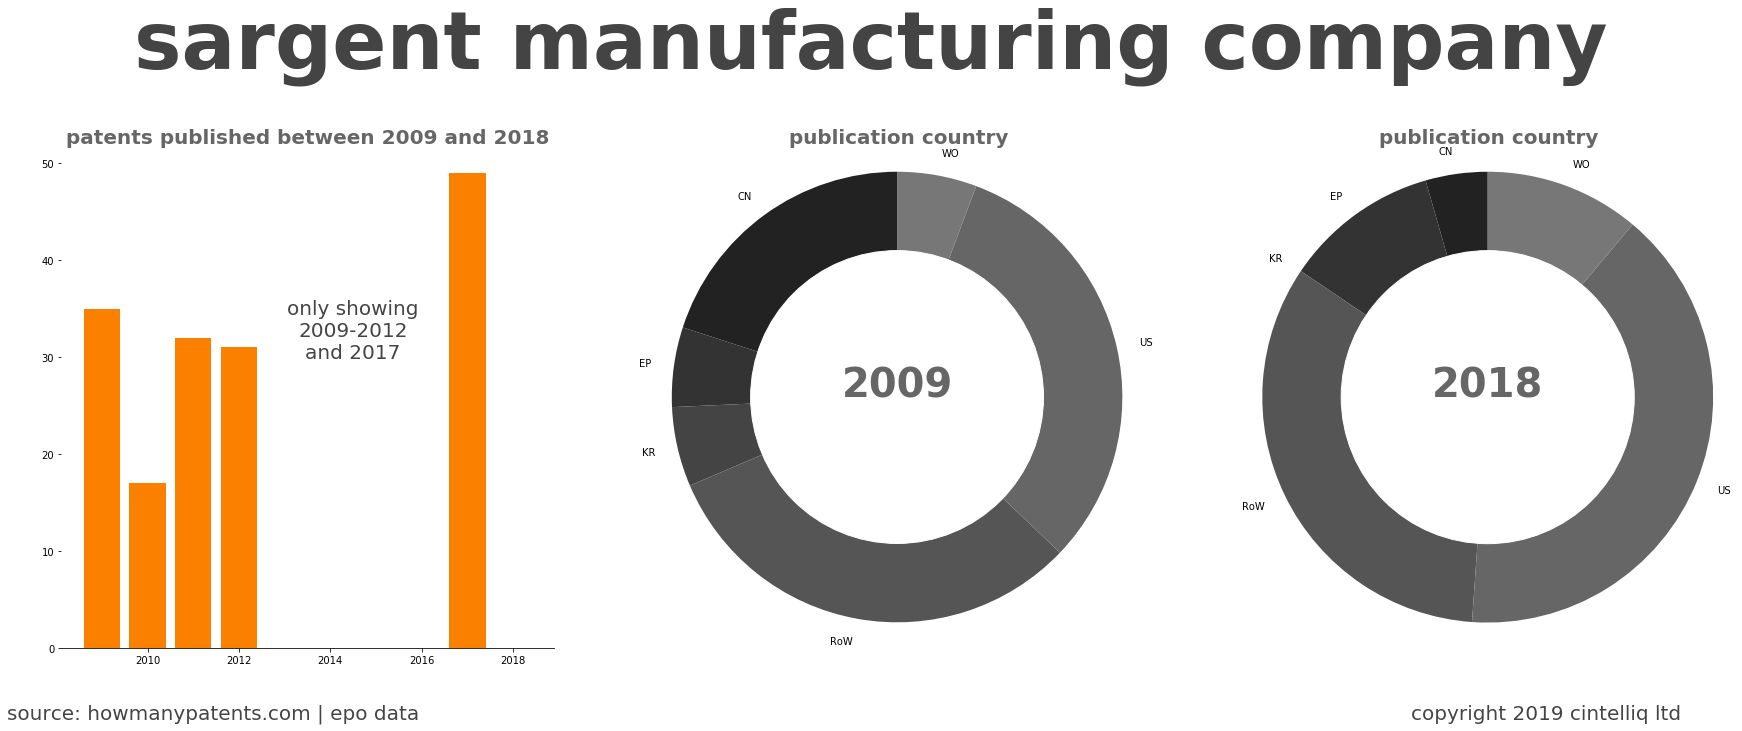 summary of patents for Sargent Manufacturing Company